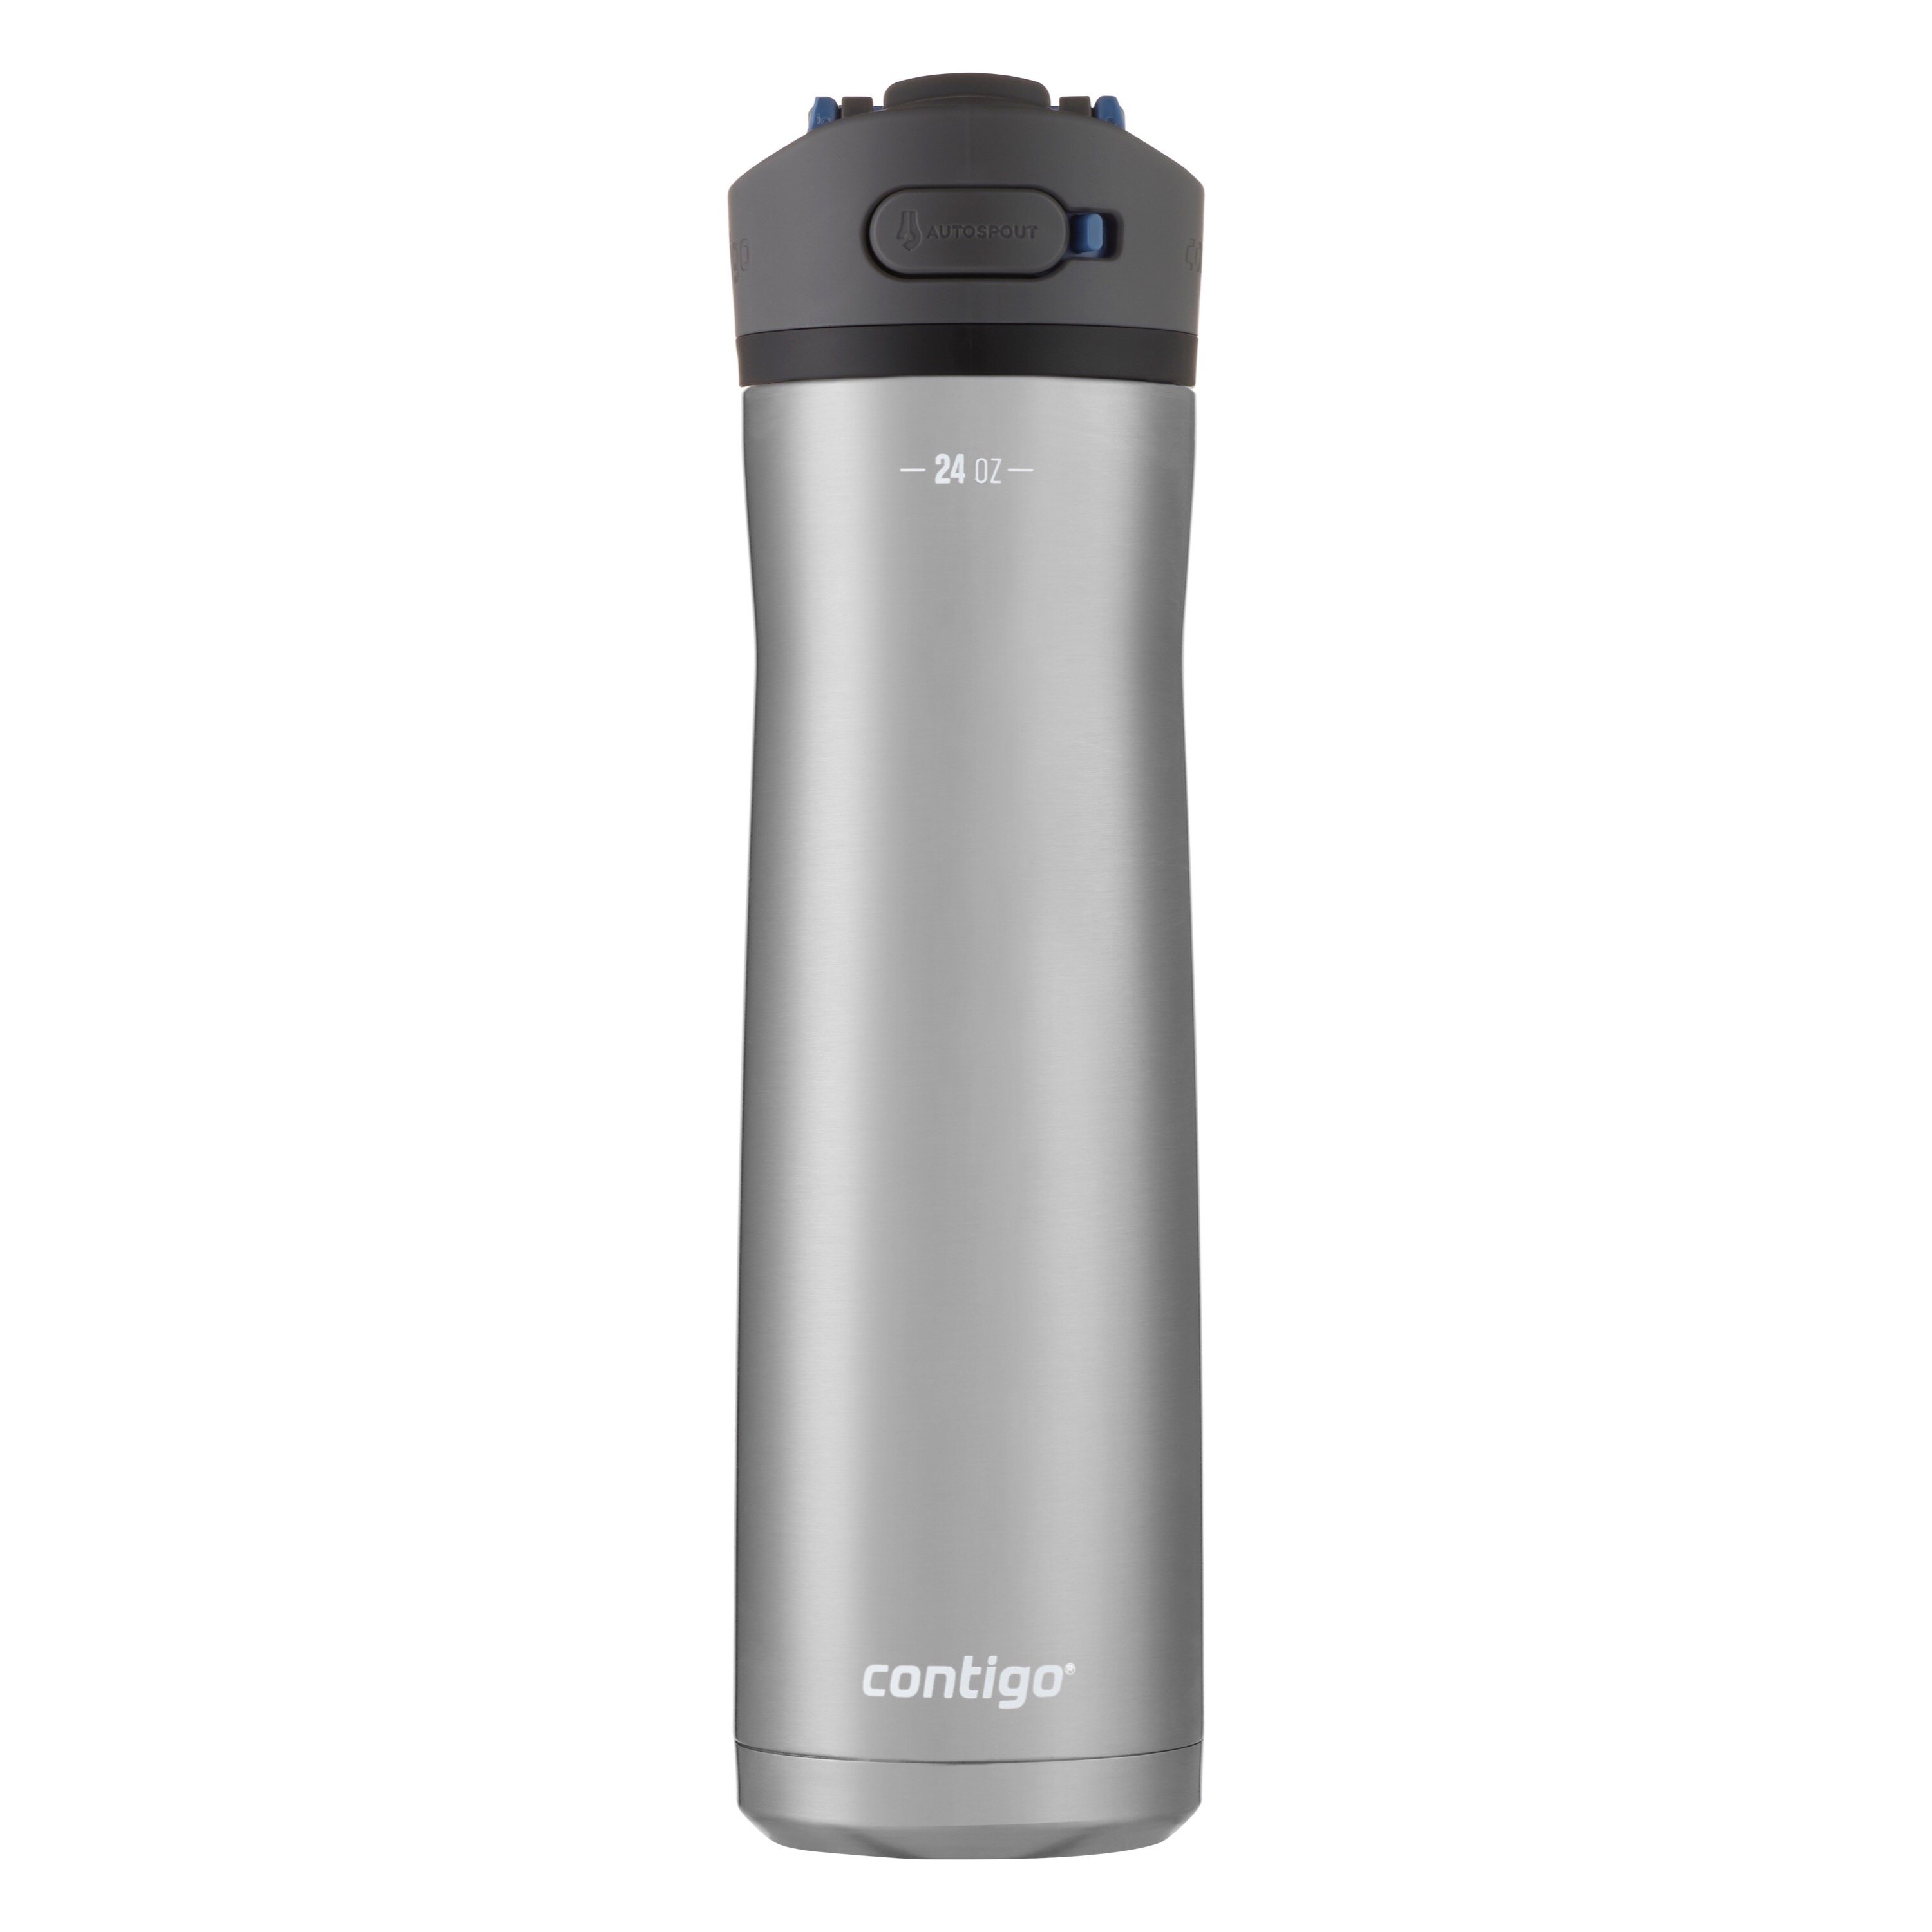 Contigo 13oz Kids Stainless Steel Water Bottle with Redesigned